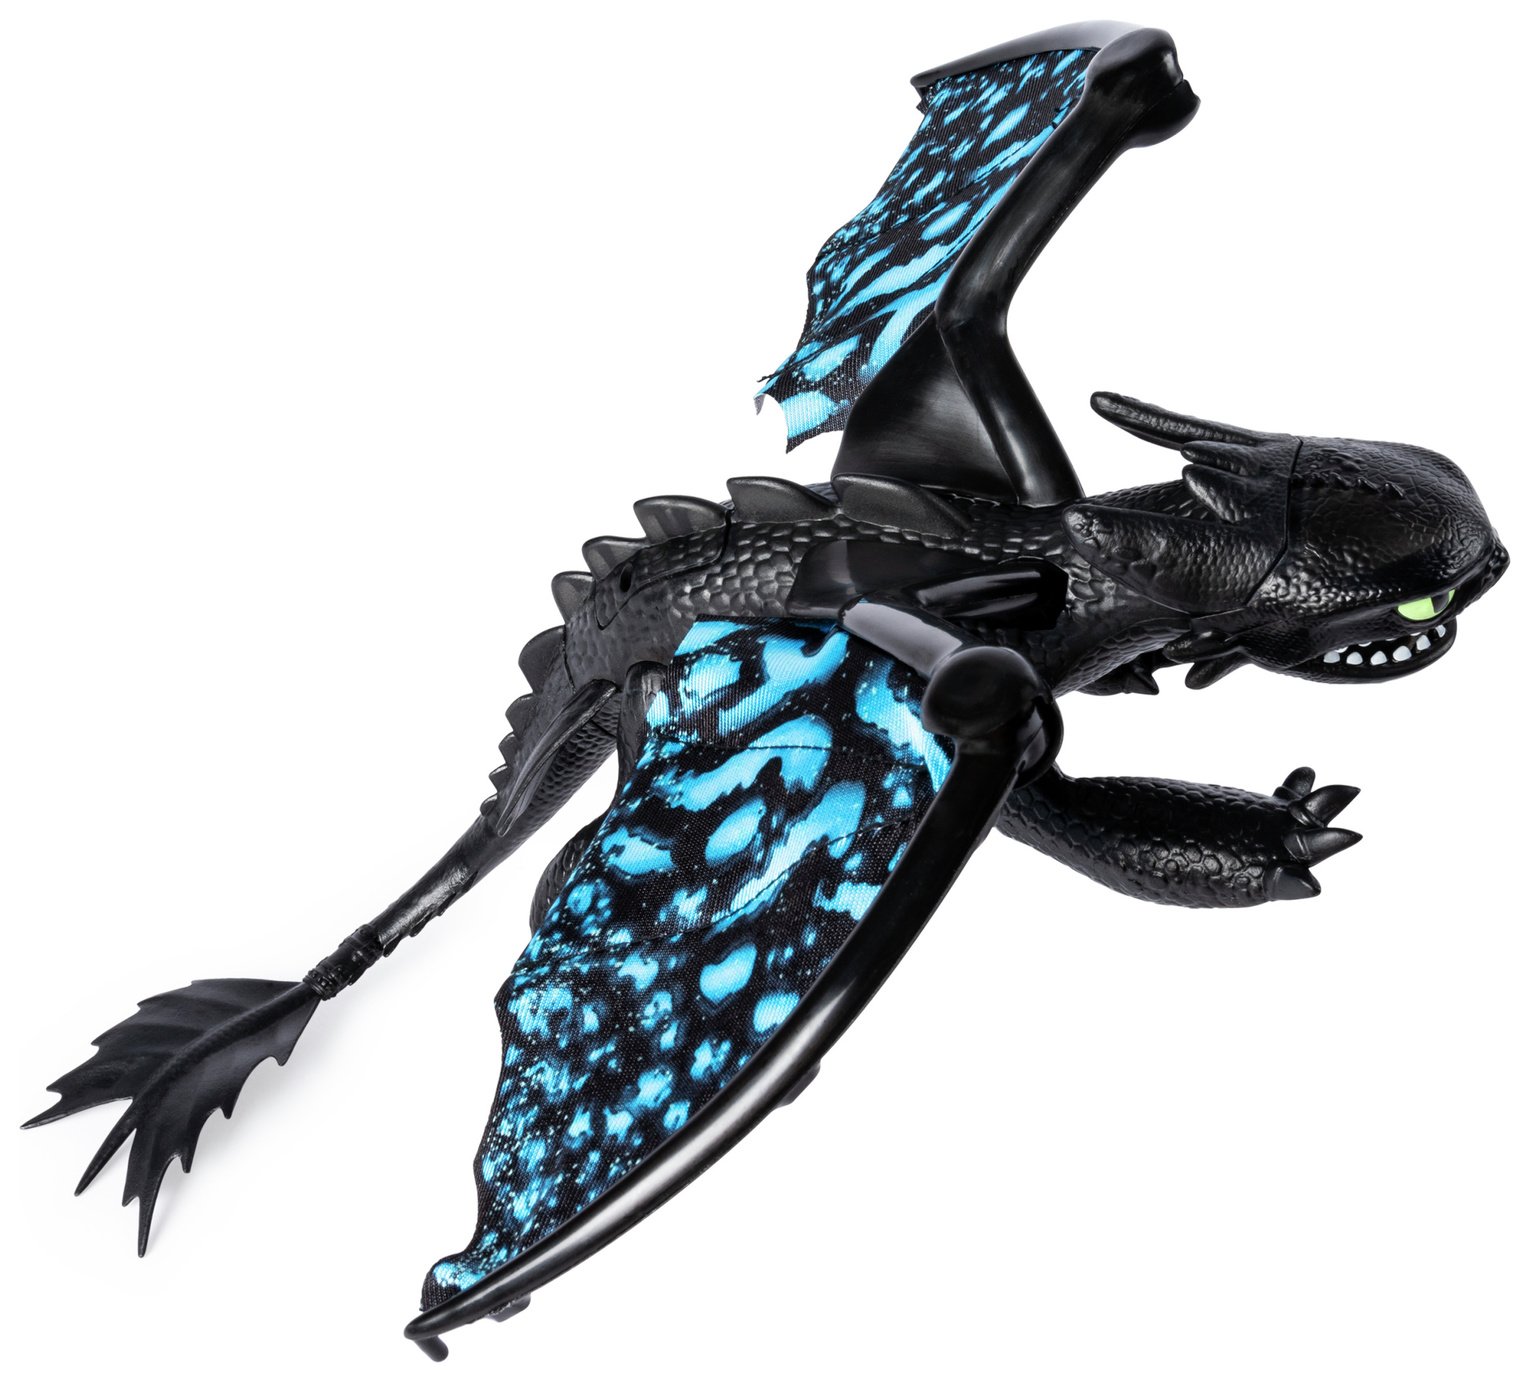 DreamWorks Dragons 3 Deluxe Dragon Toothless review